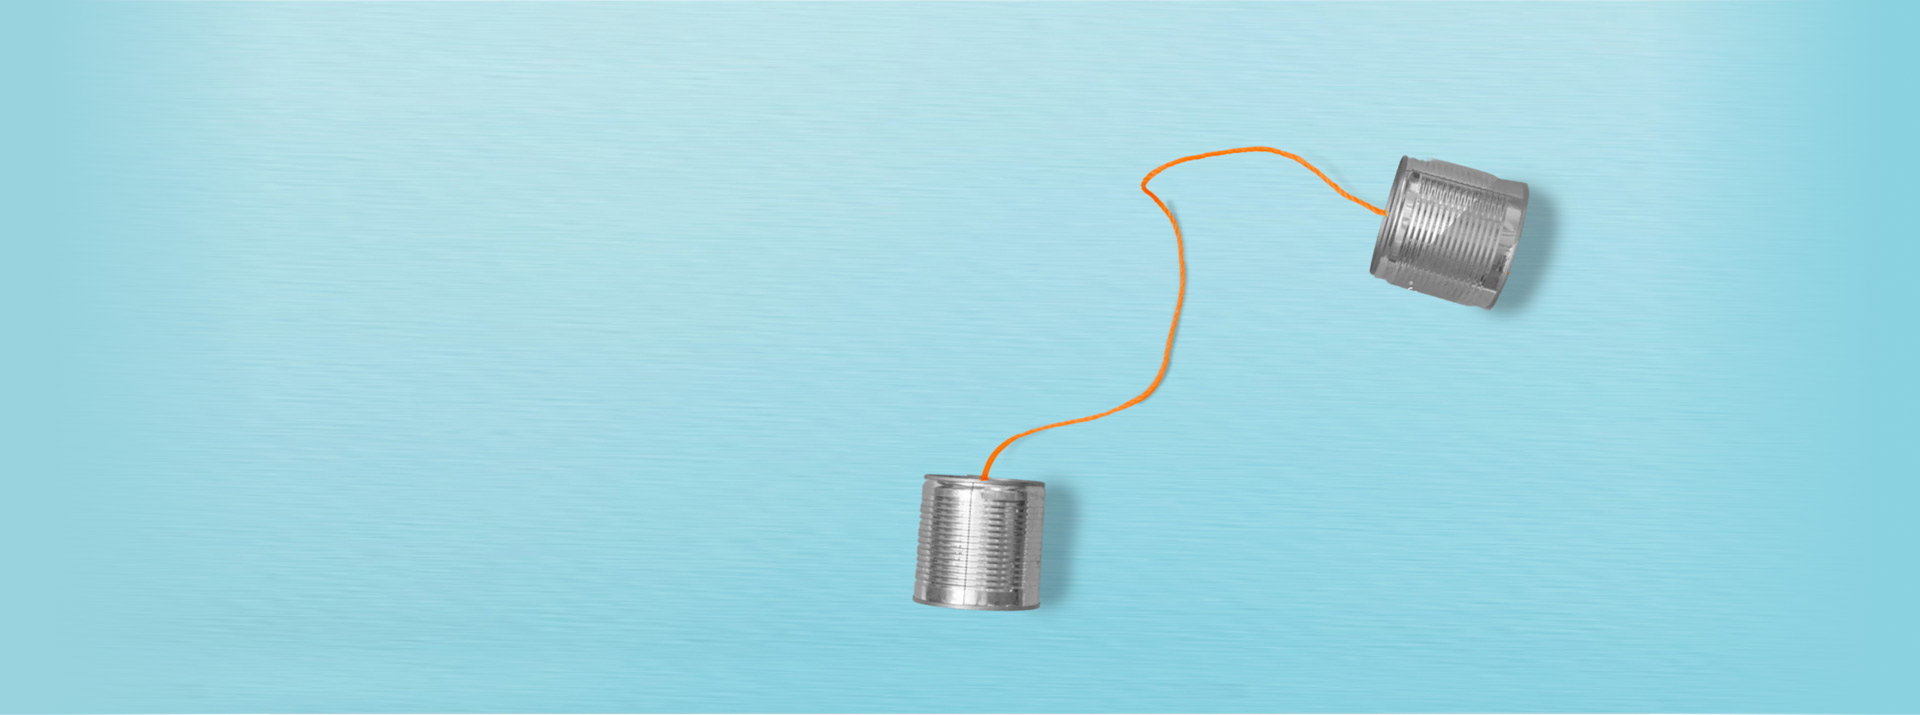 Two metal cans connected by an orange string